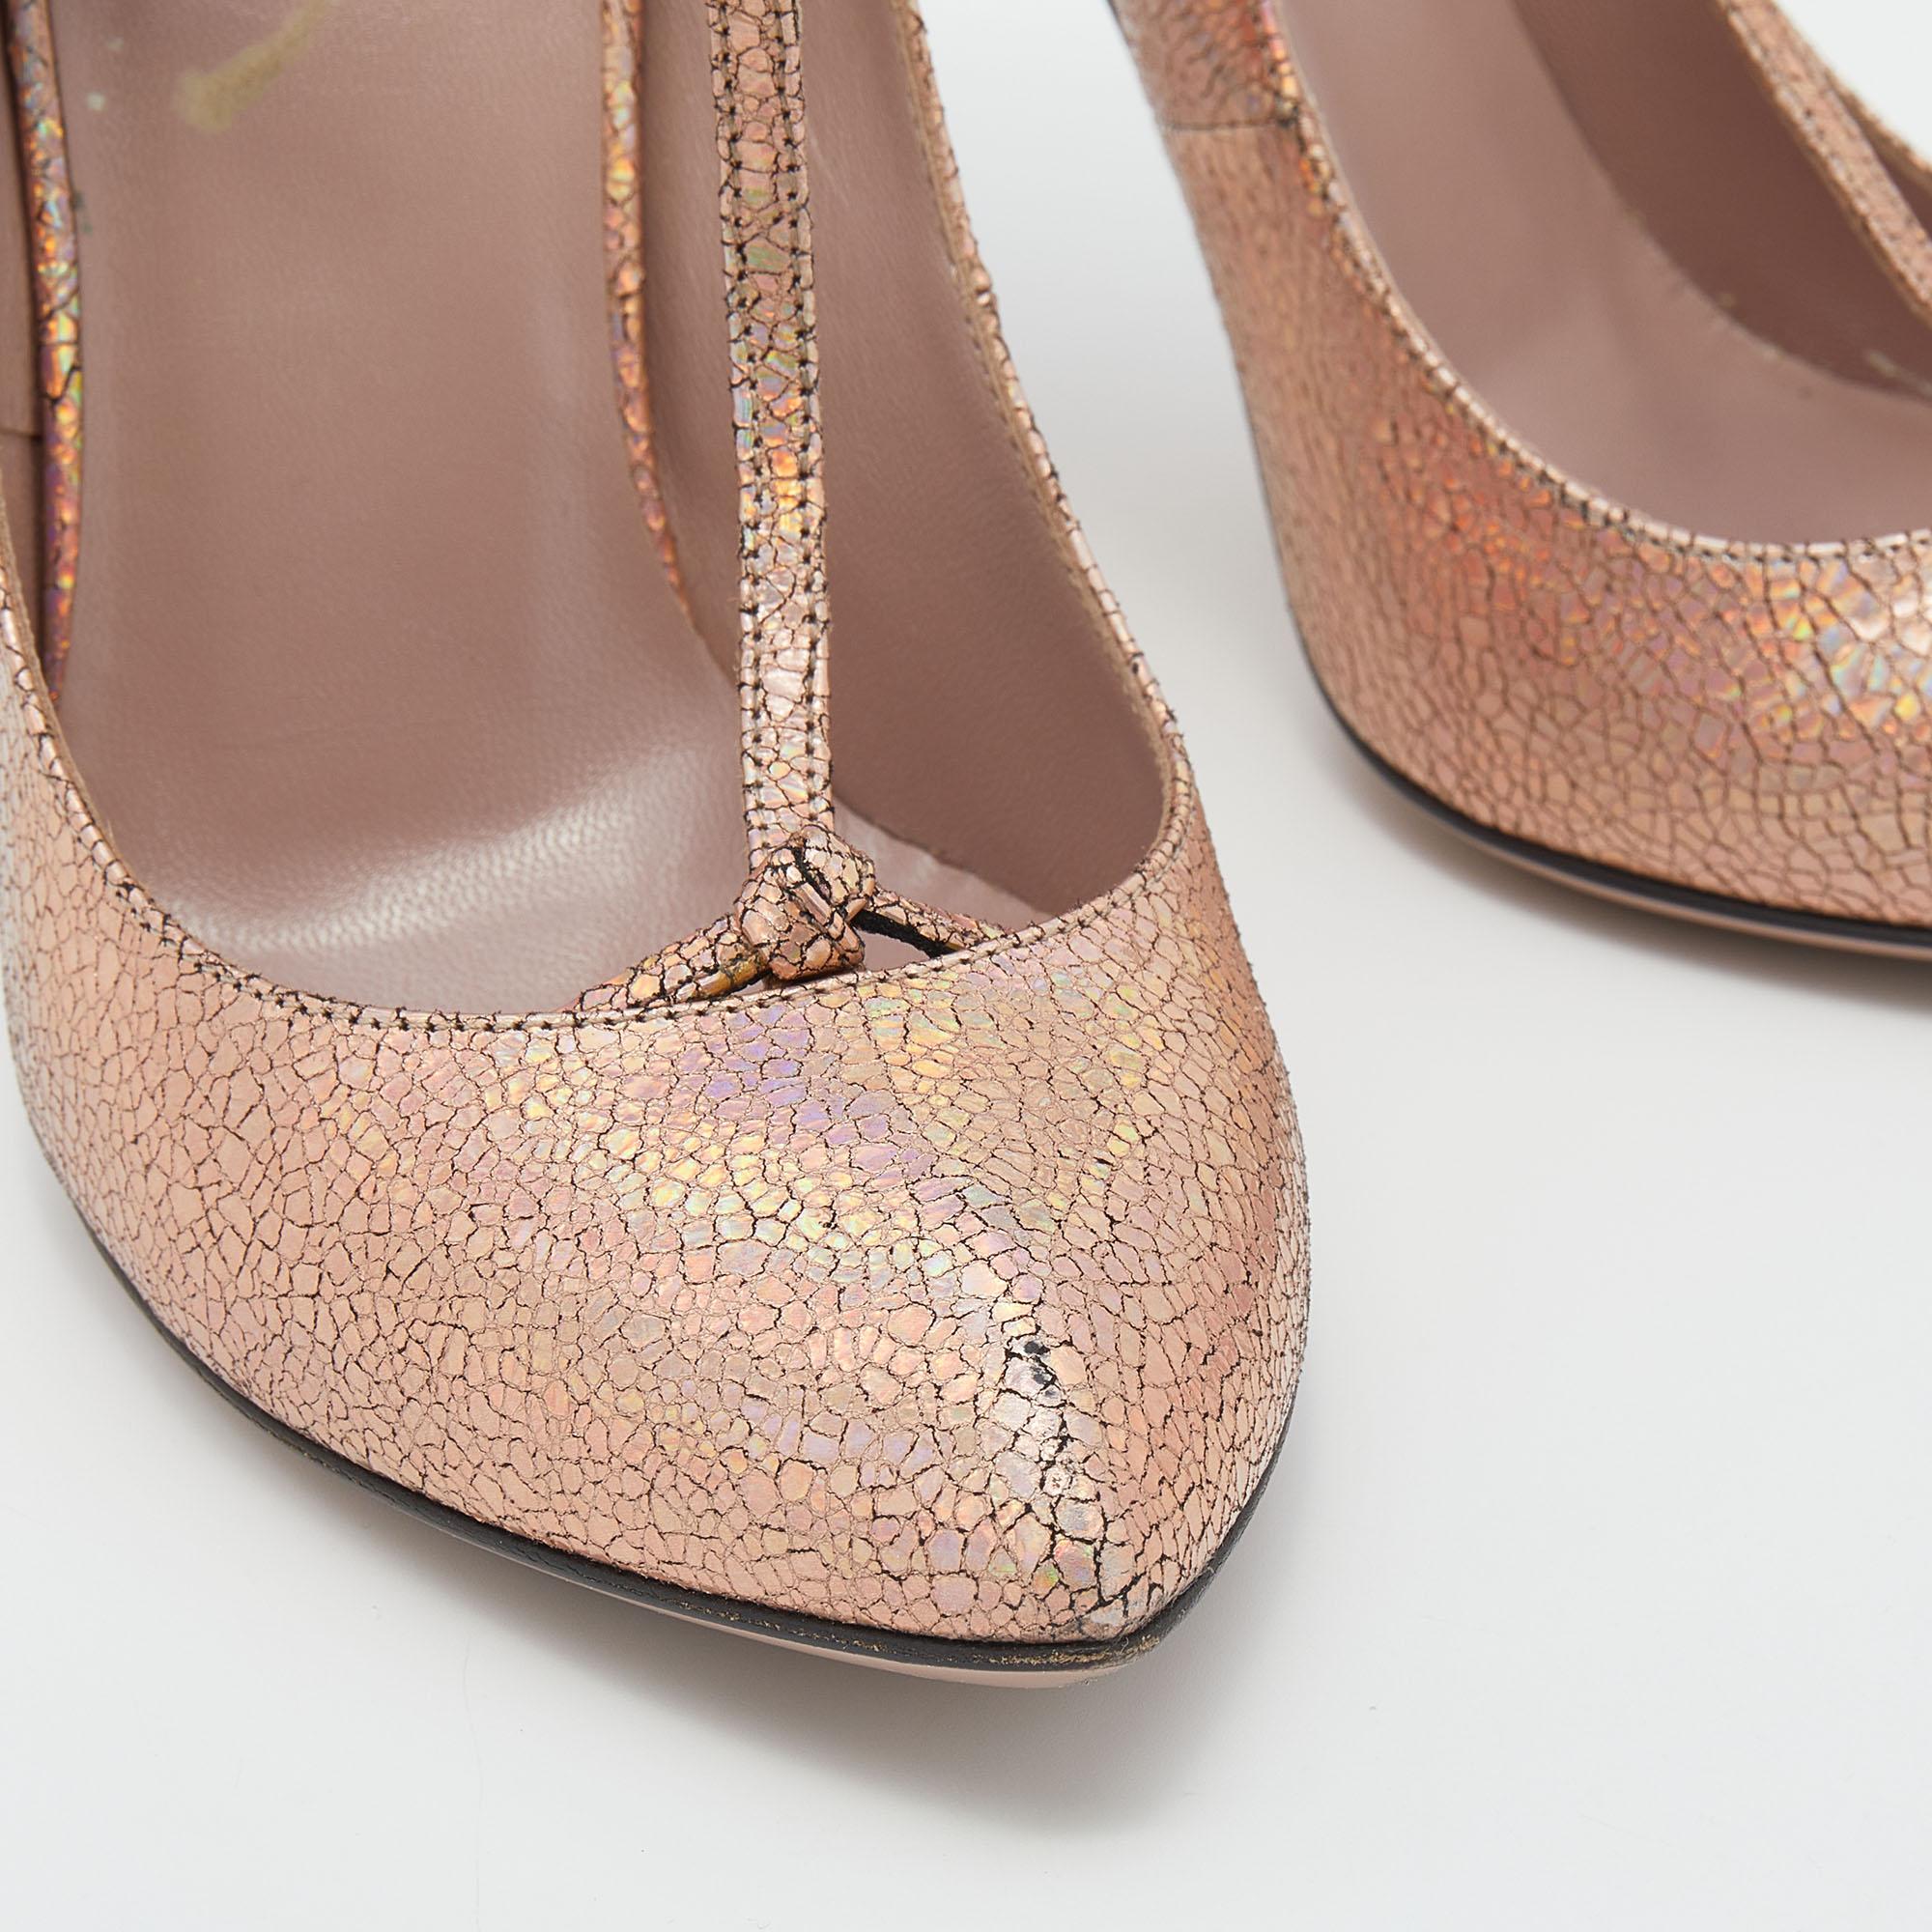 Gucci Metallic Holographic Crackled Leather Beverly T-Strap Pumps Size 37 For Sale 1